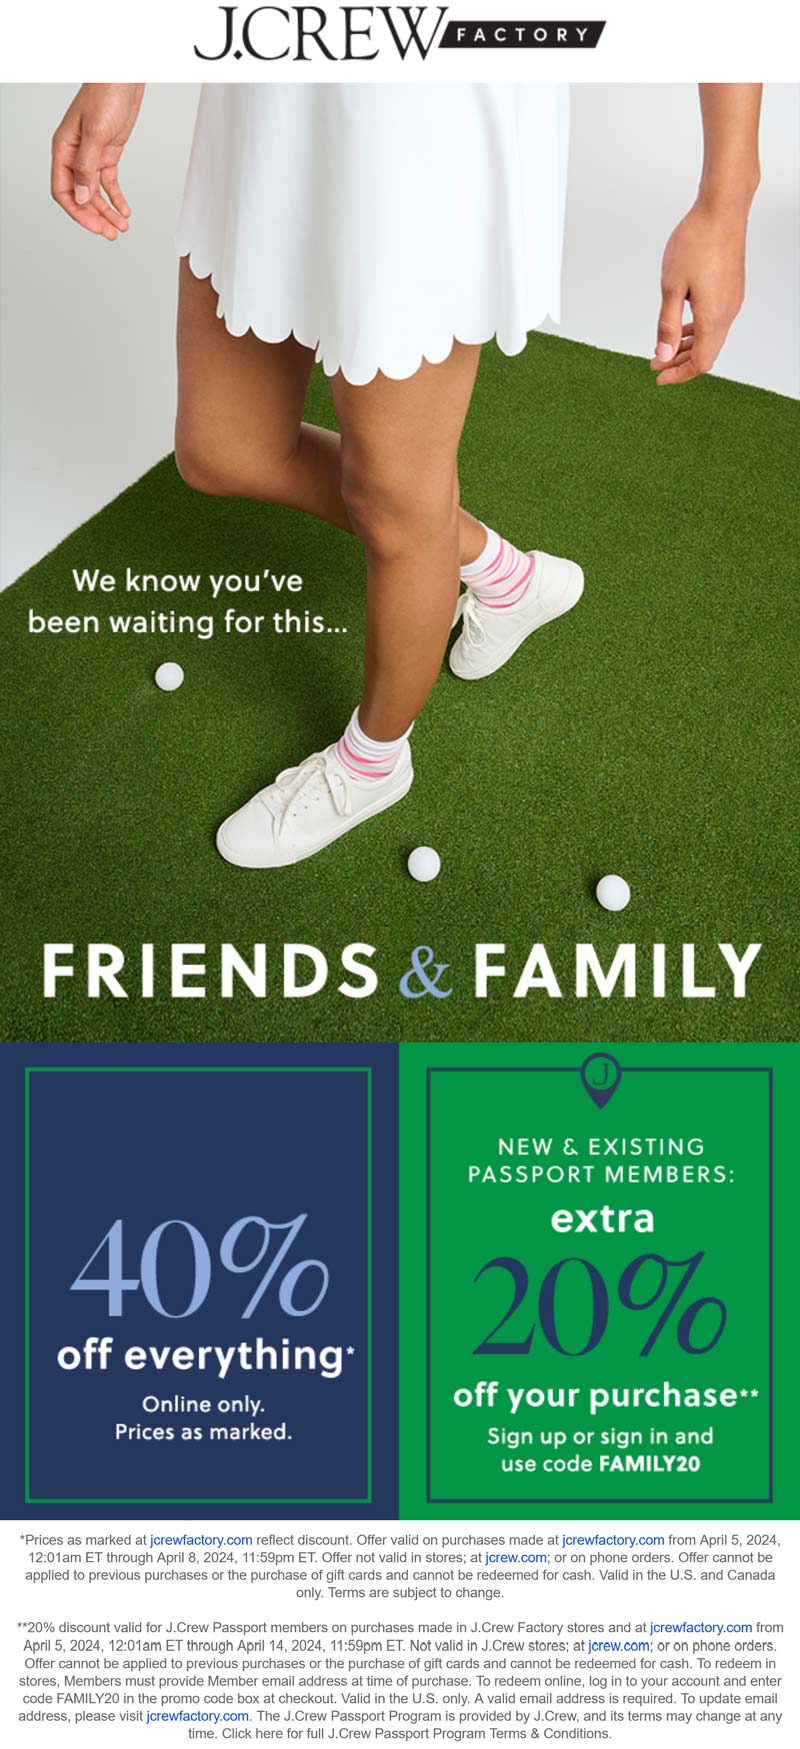 J.Crew Factory stores Coupon  40% off everything online at J.Crew Factory via promo code FAMILY20 #jcrewfactory 